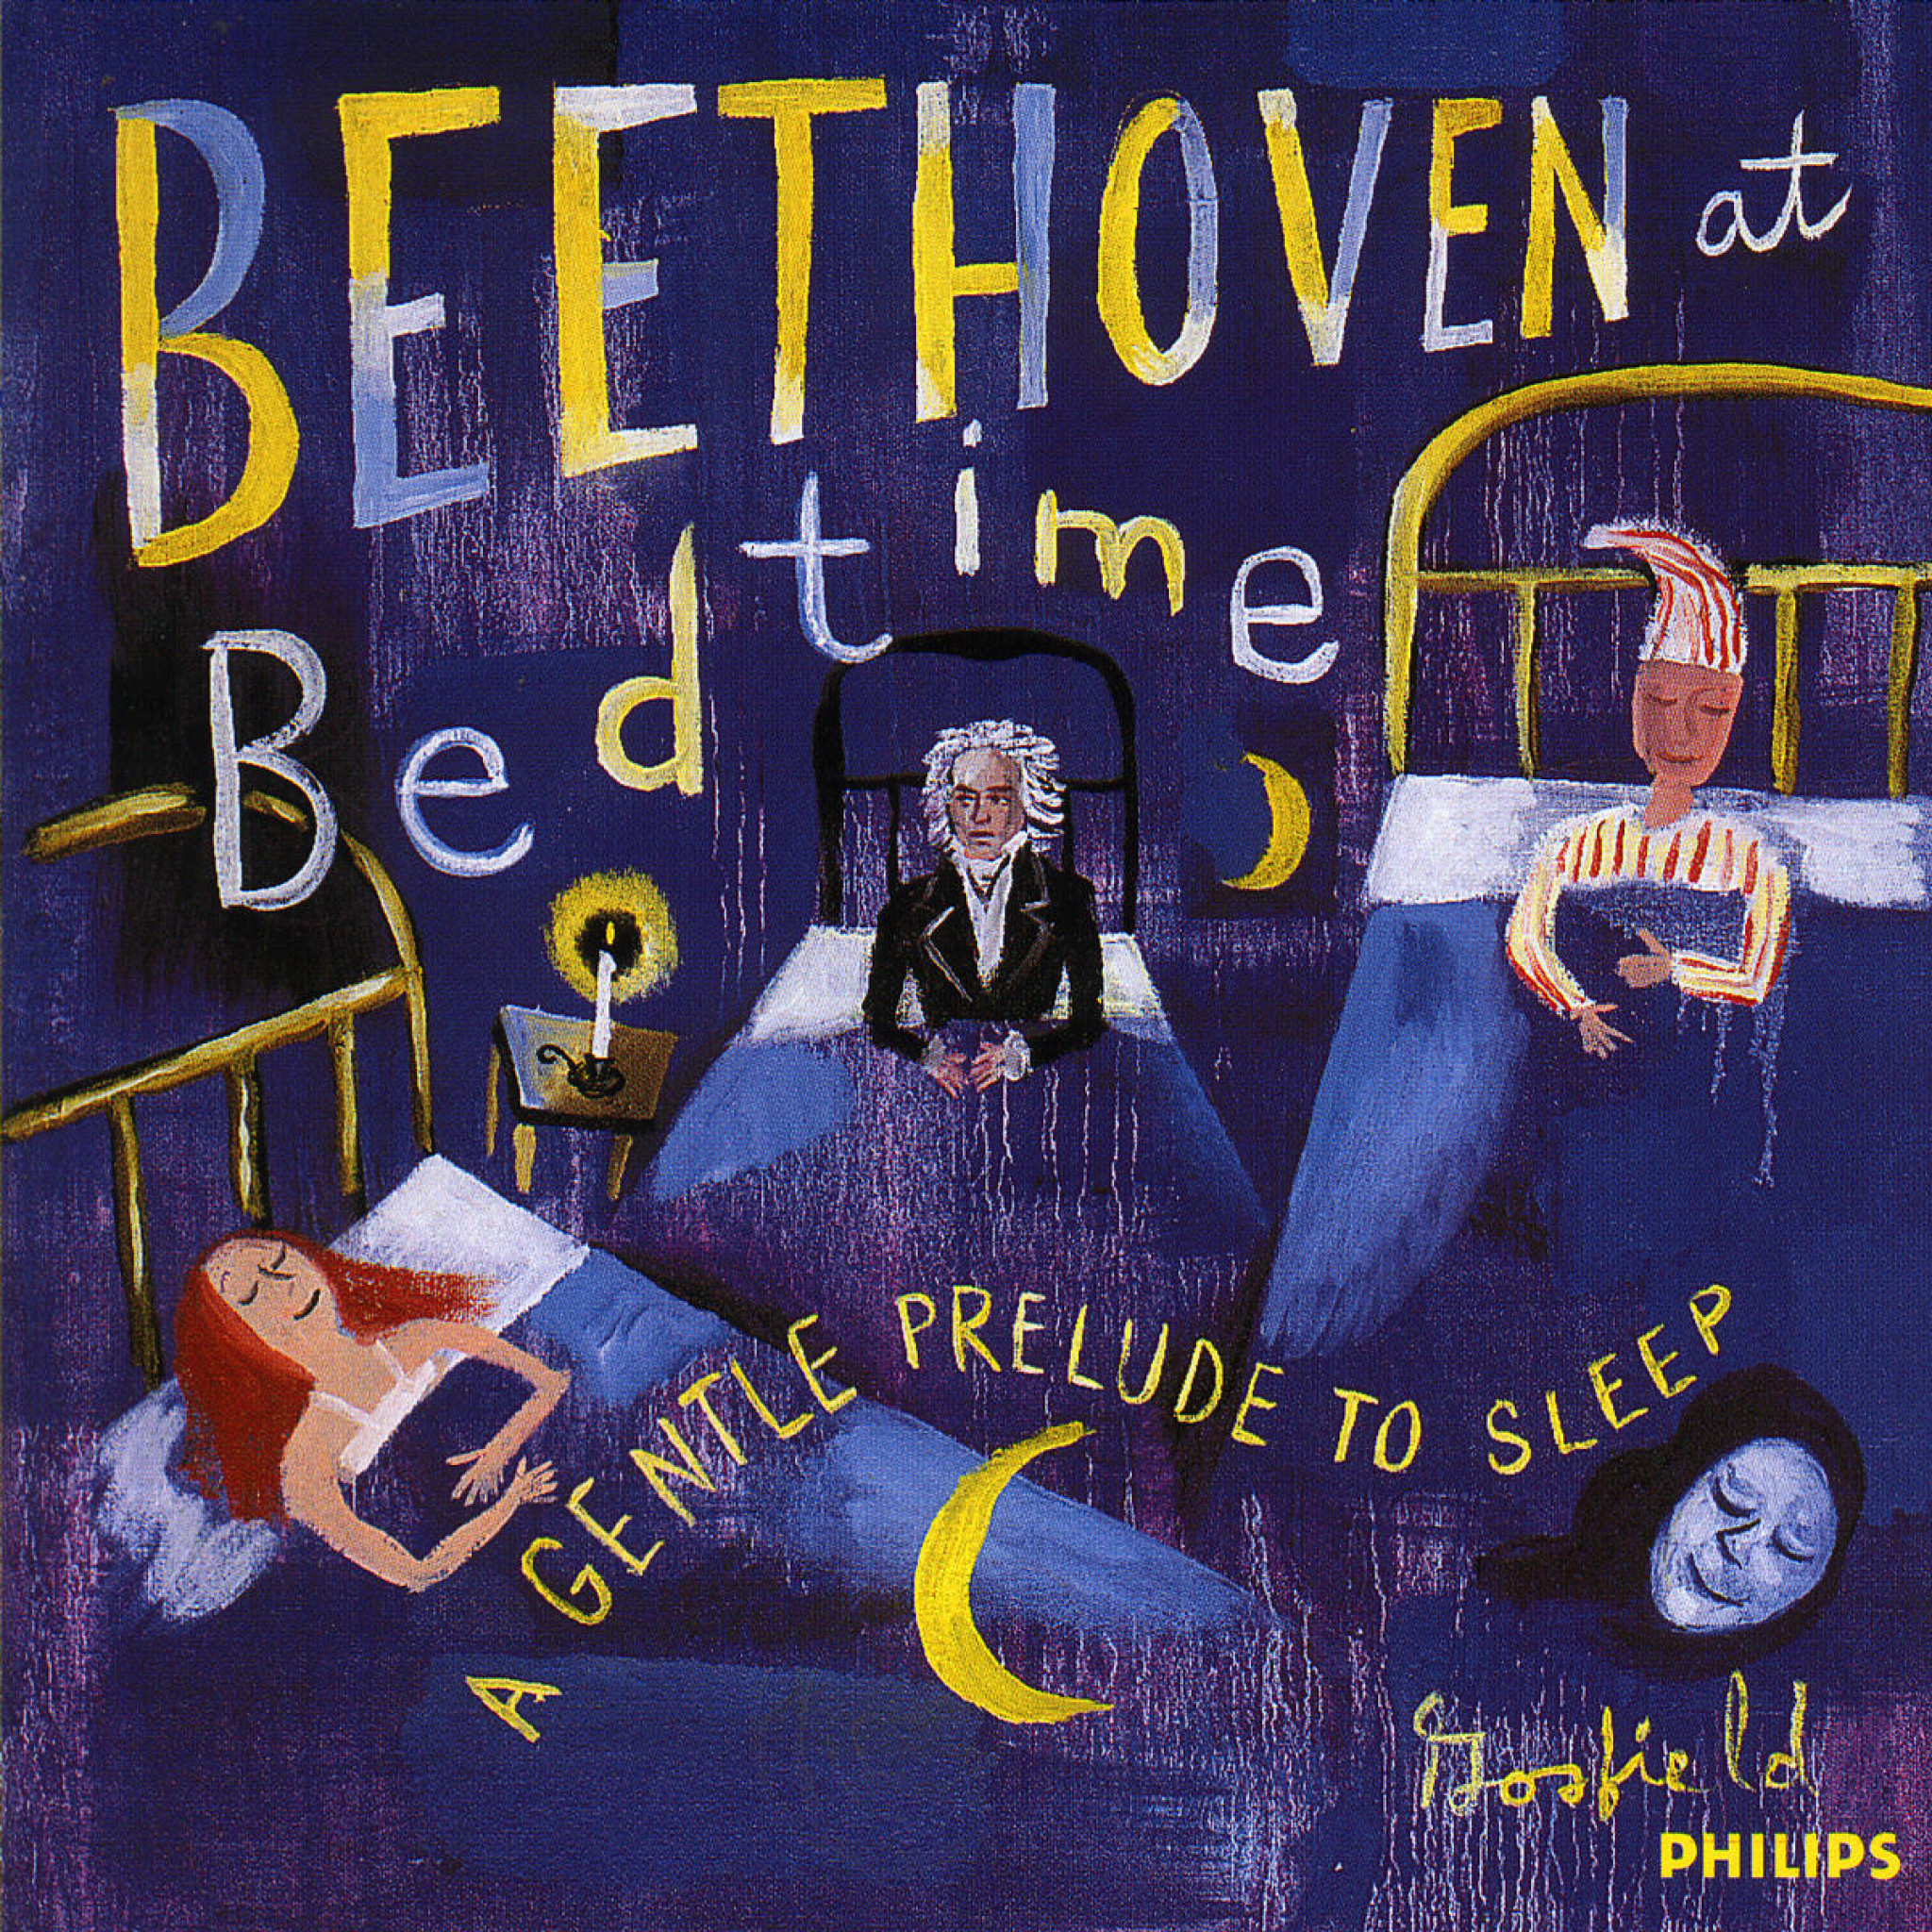 BEETHOVEN AT BEDTIME 